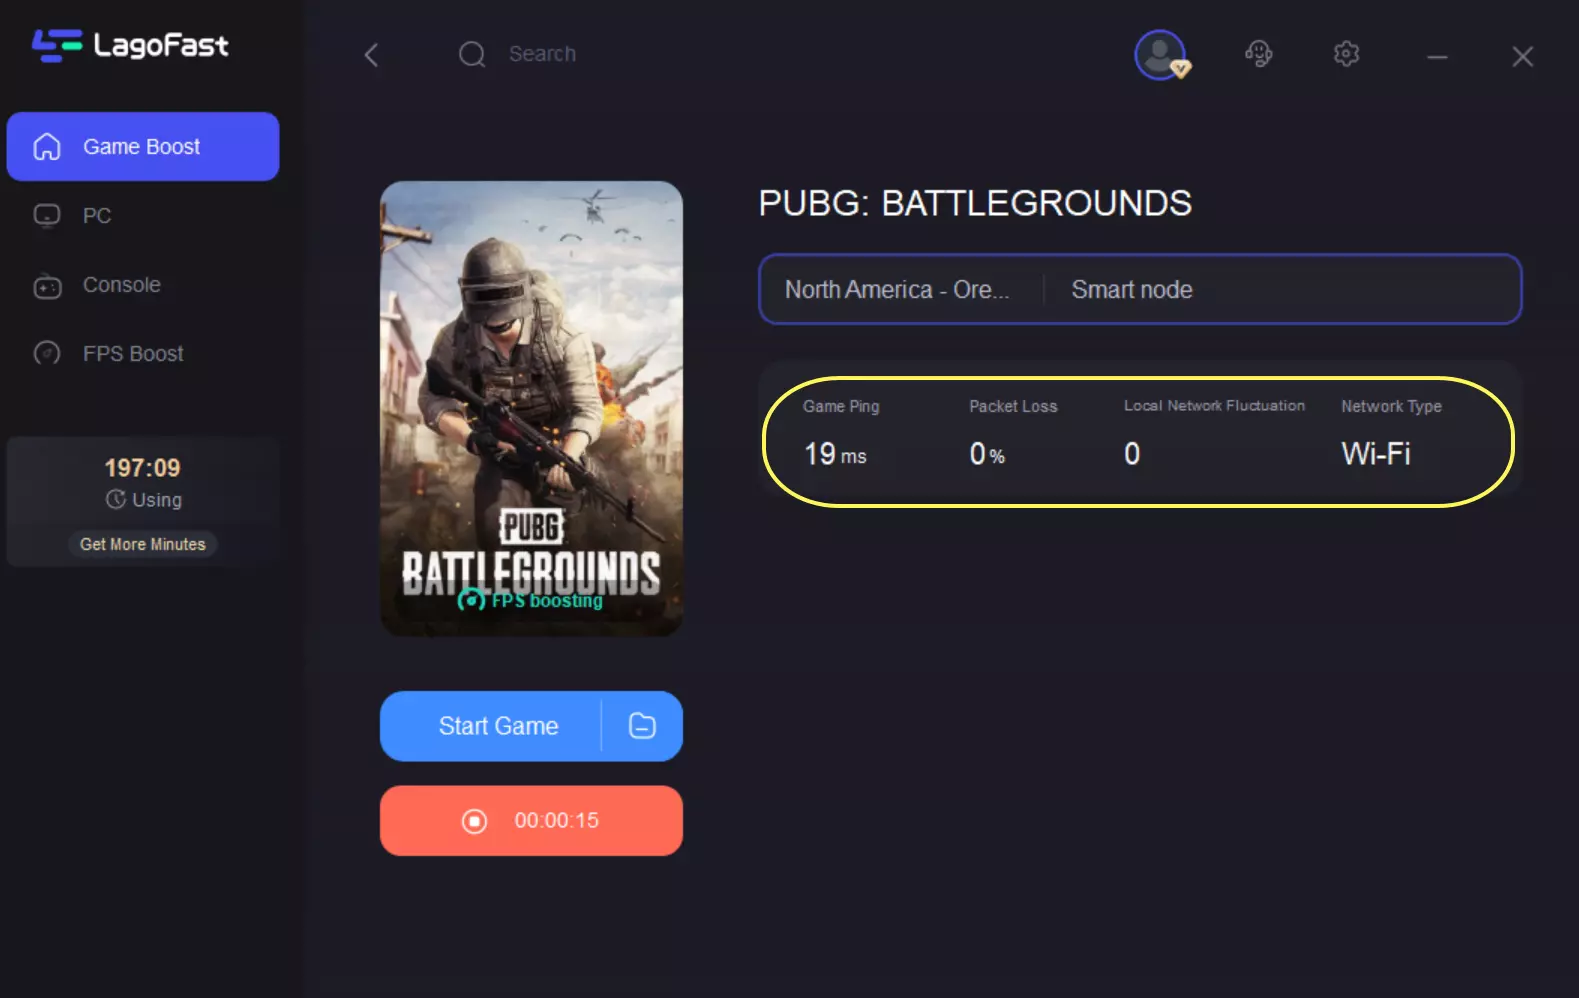 start game button for pubg